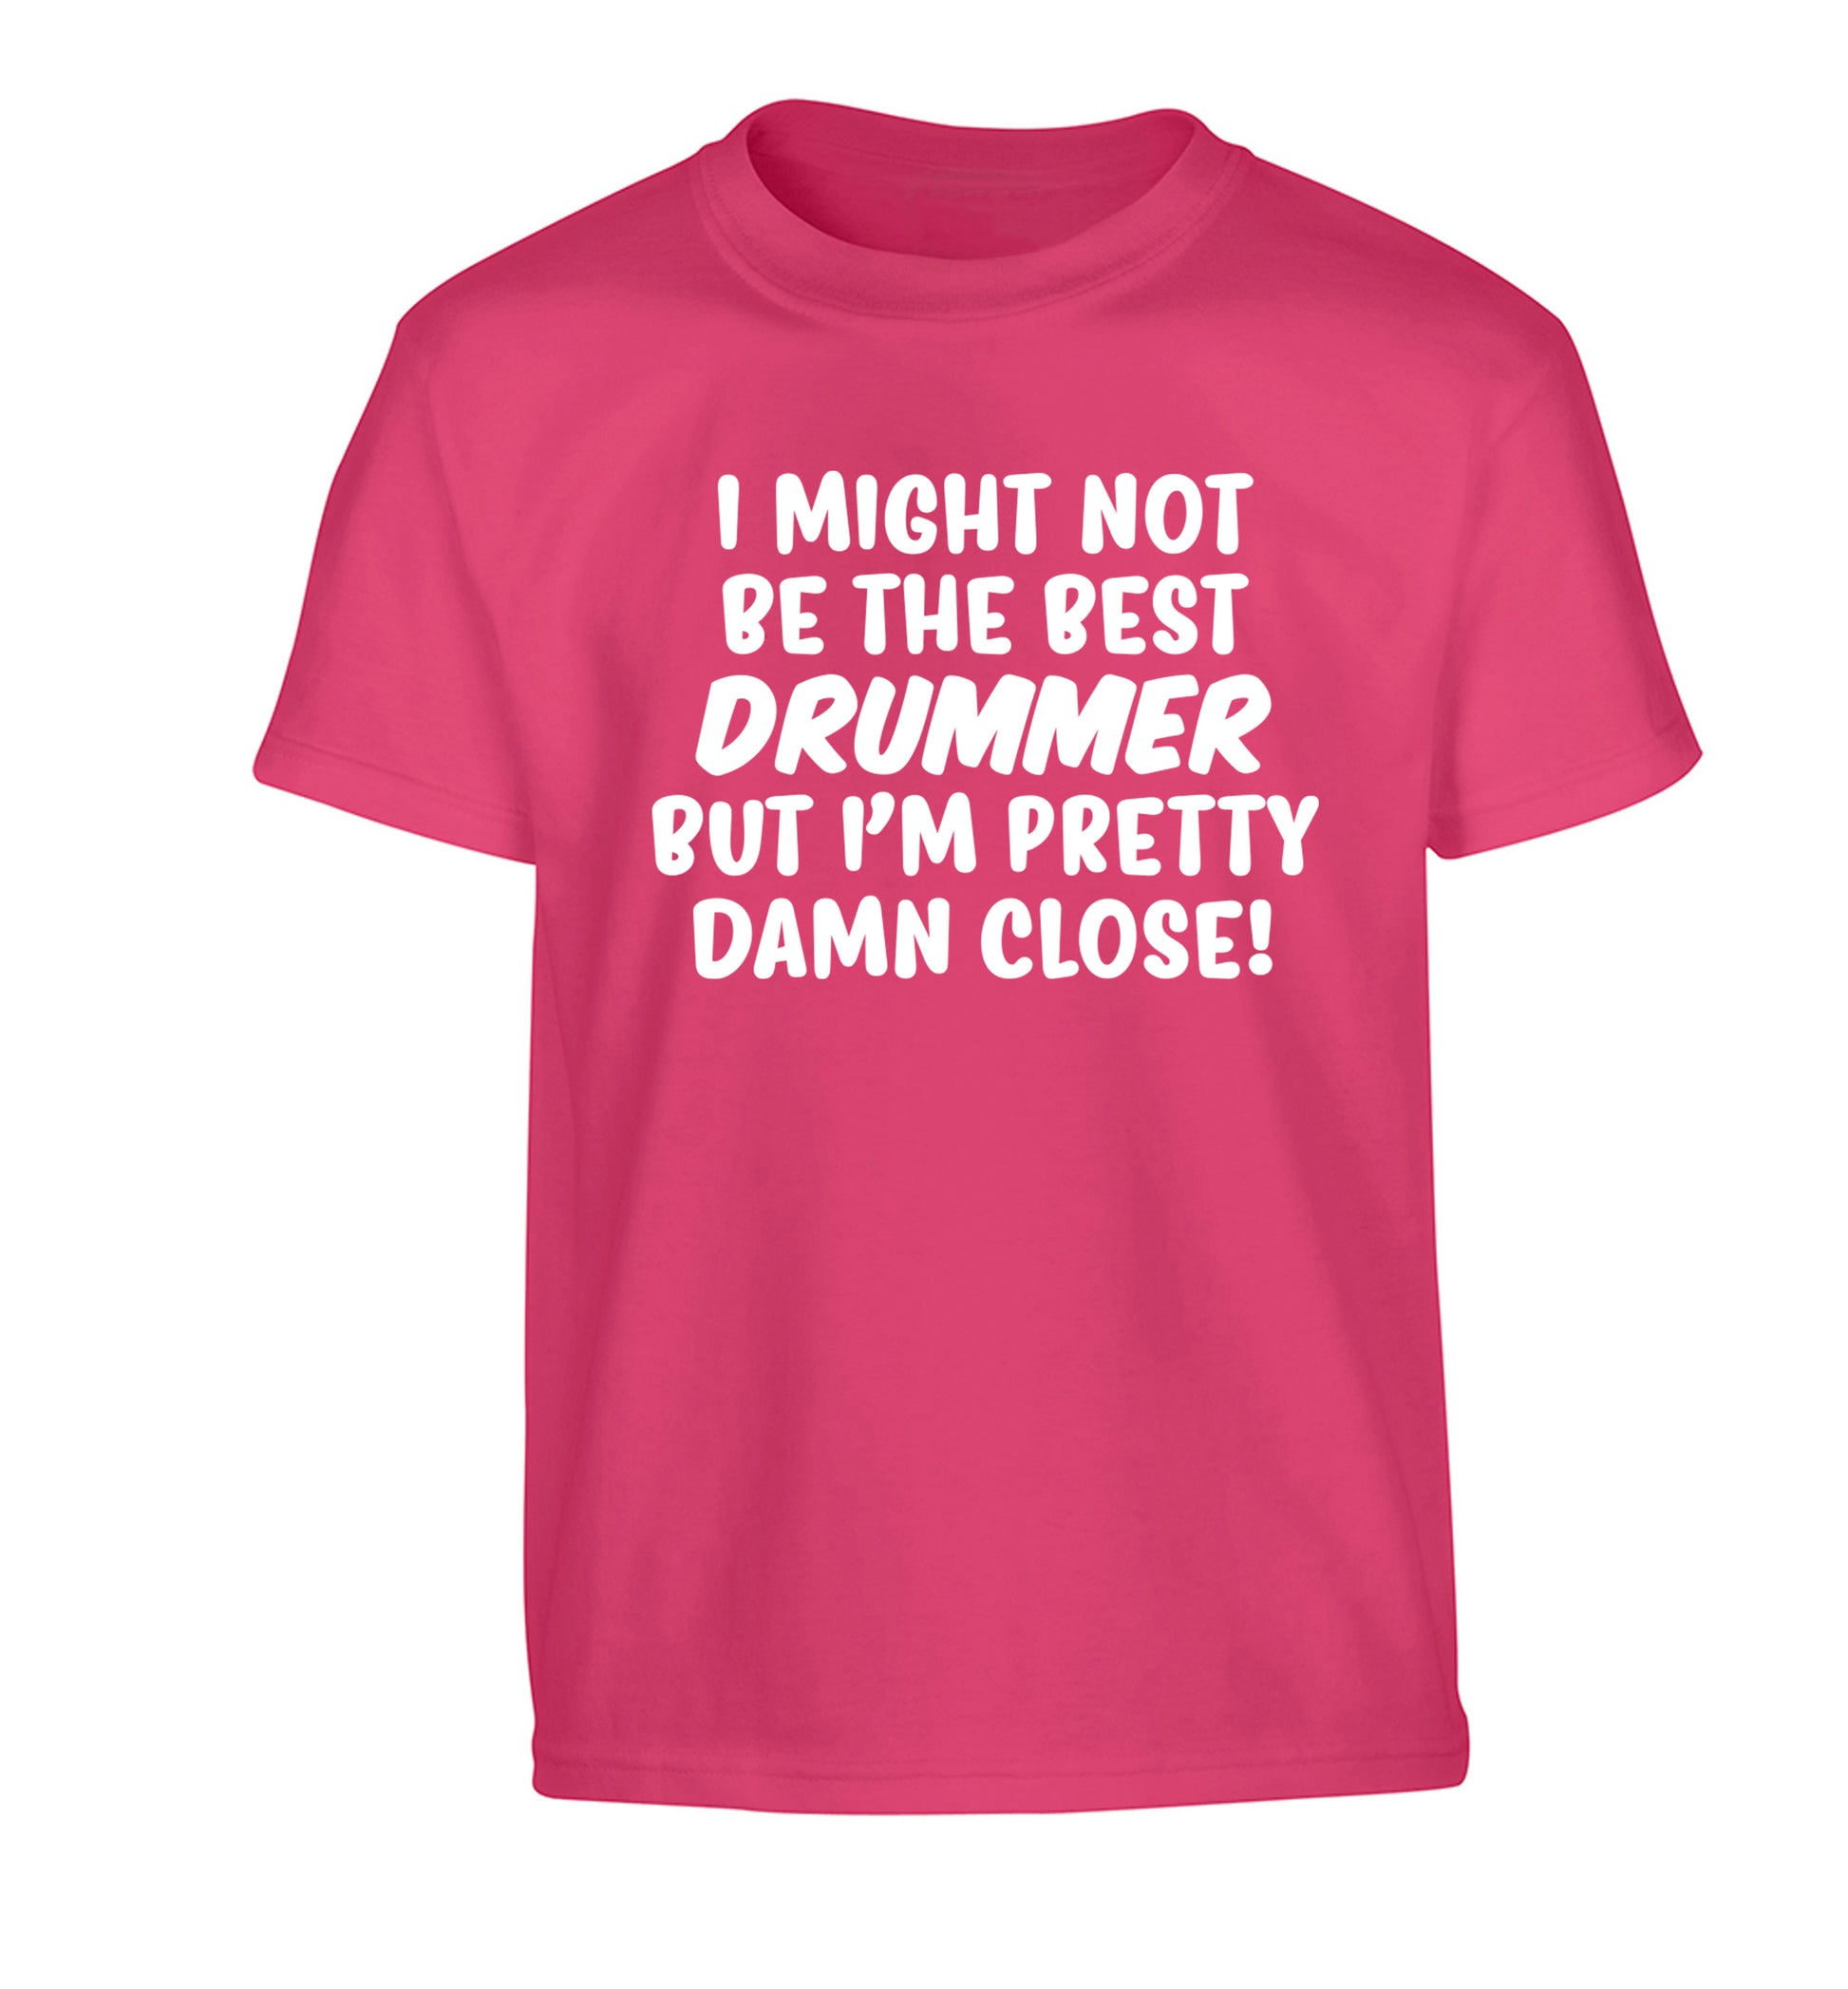 I might not be the best drummer but I'm pretty close! Children's pink Tshirt 12-14 Years